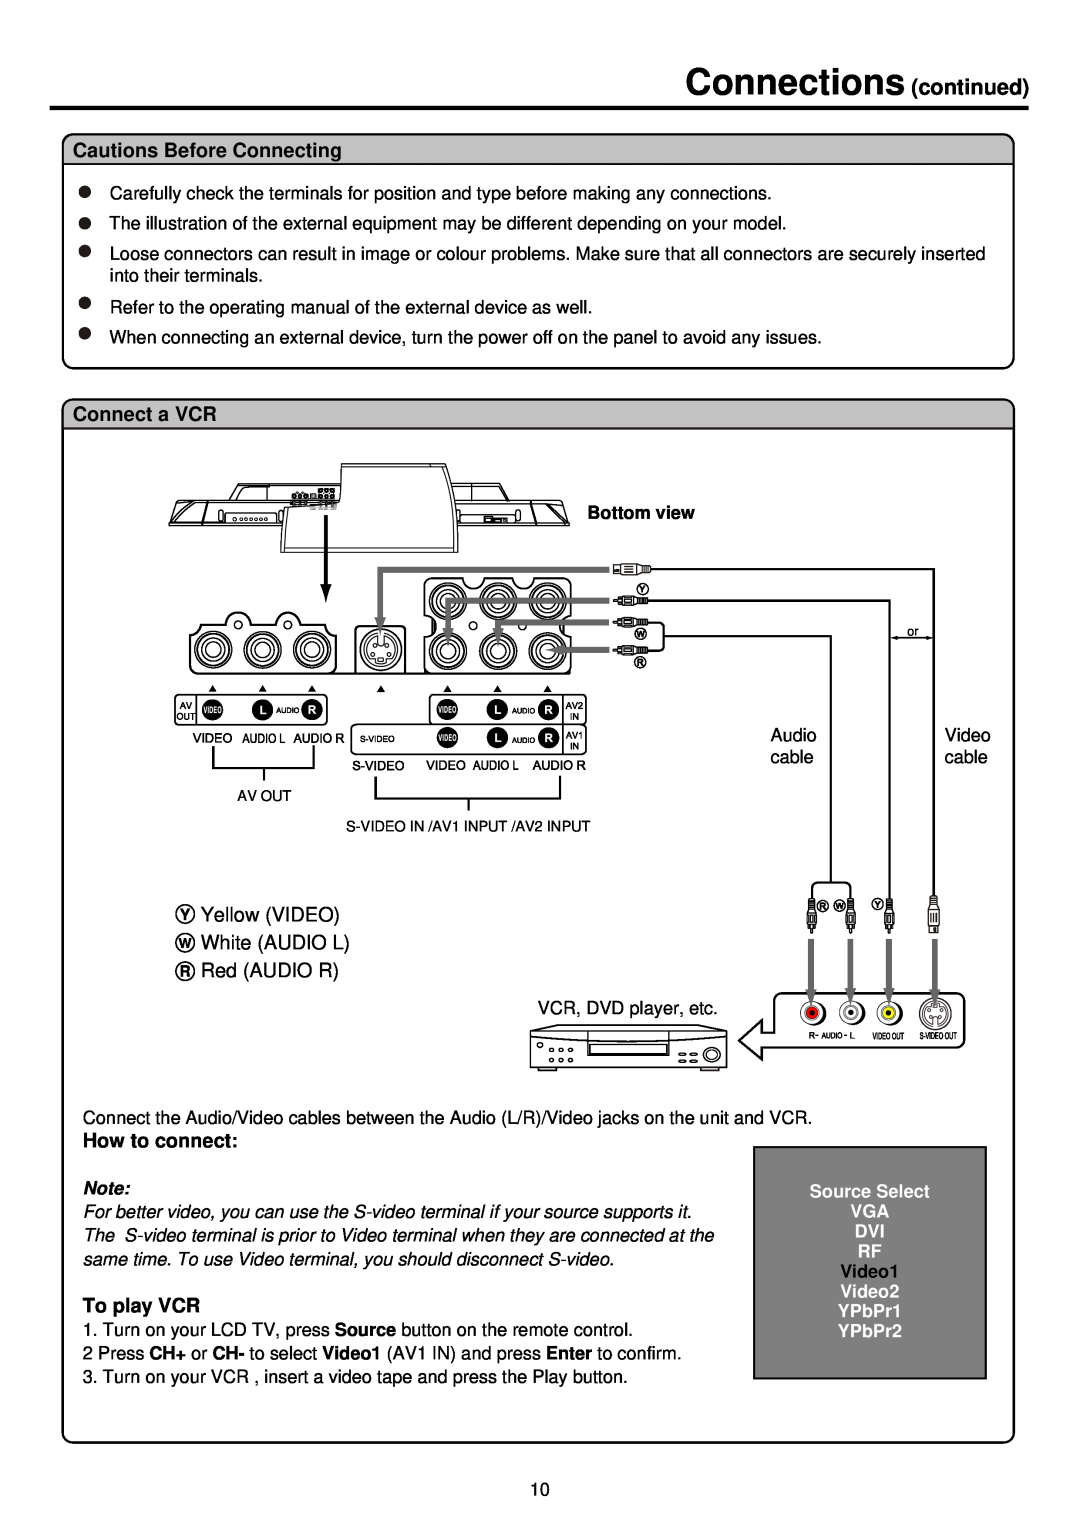 Palsonic TFTV930 owner manual Connections continued, Cautions Before Connecting, Connect a VCR, How to connect, To play VCR 